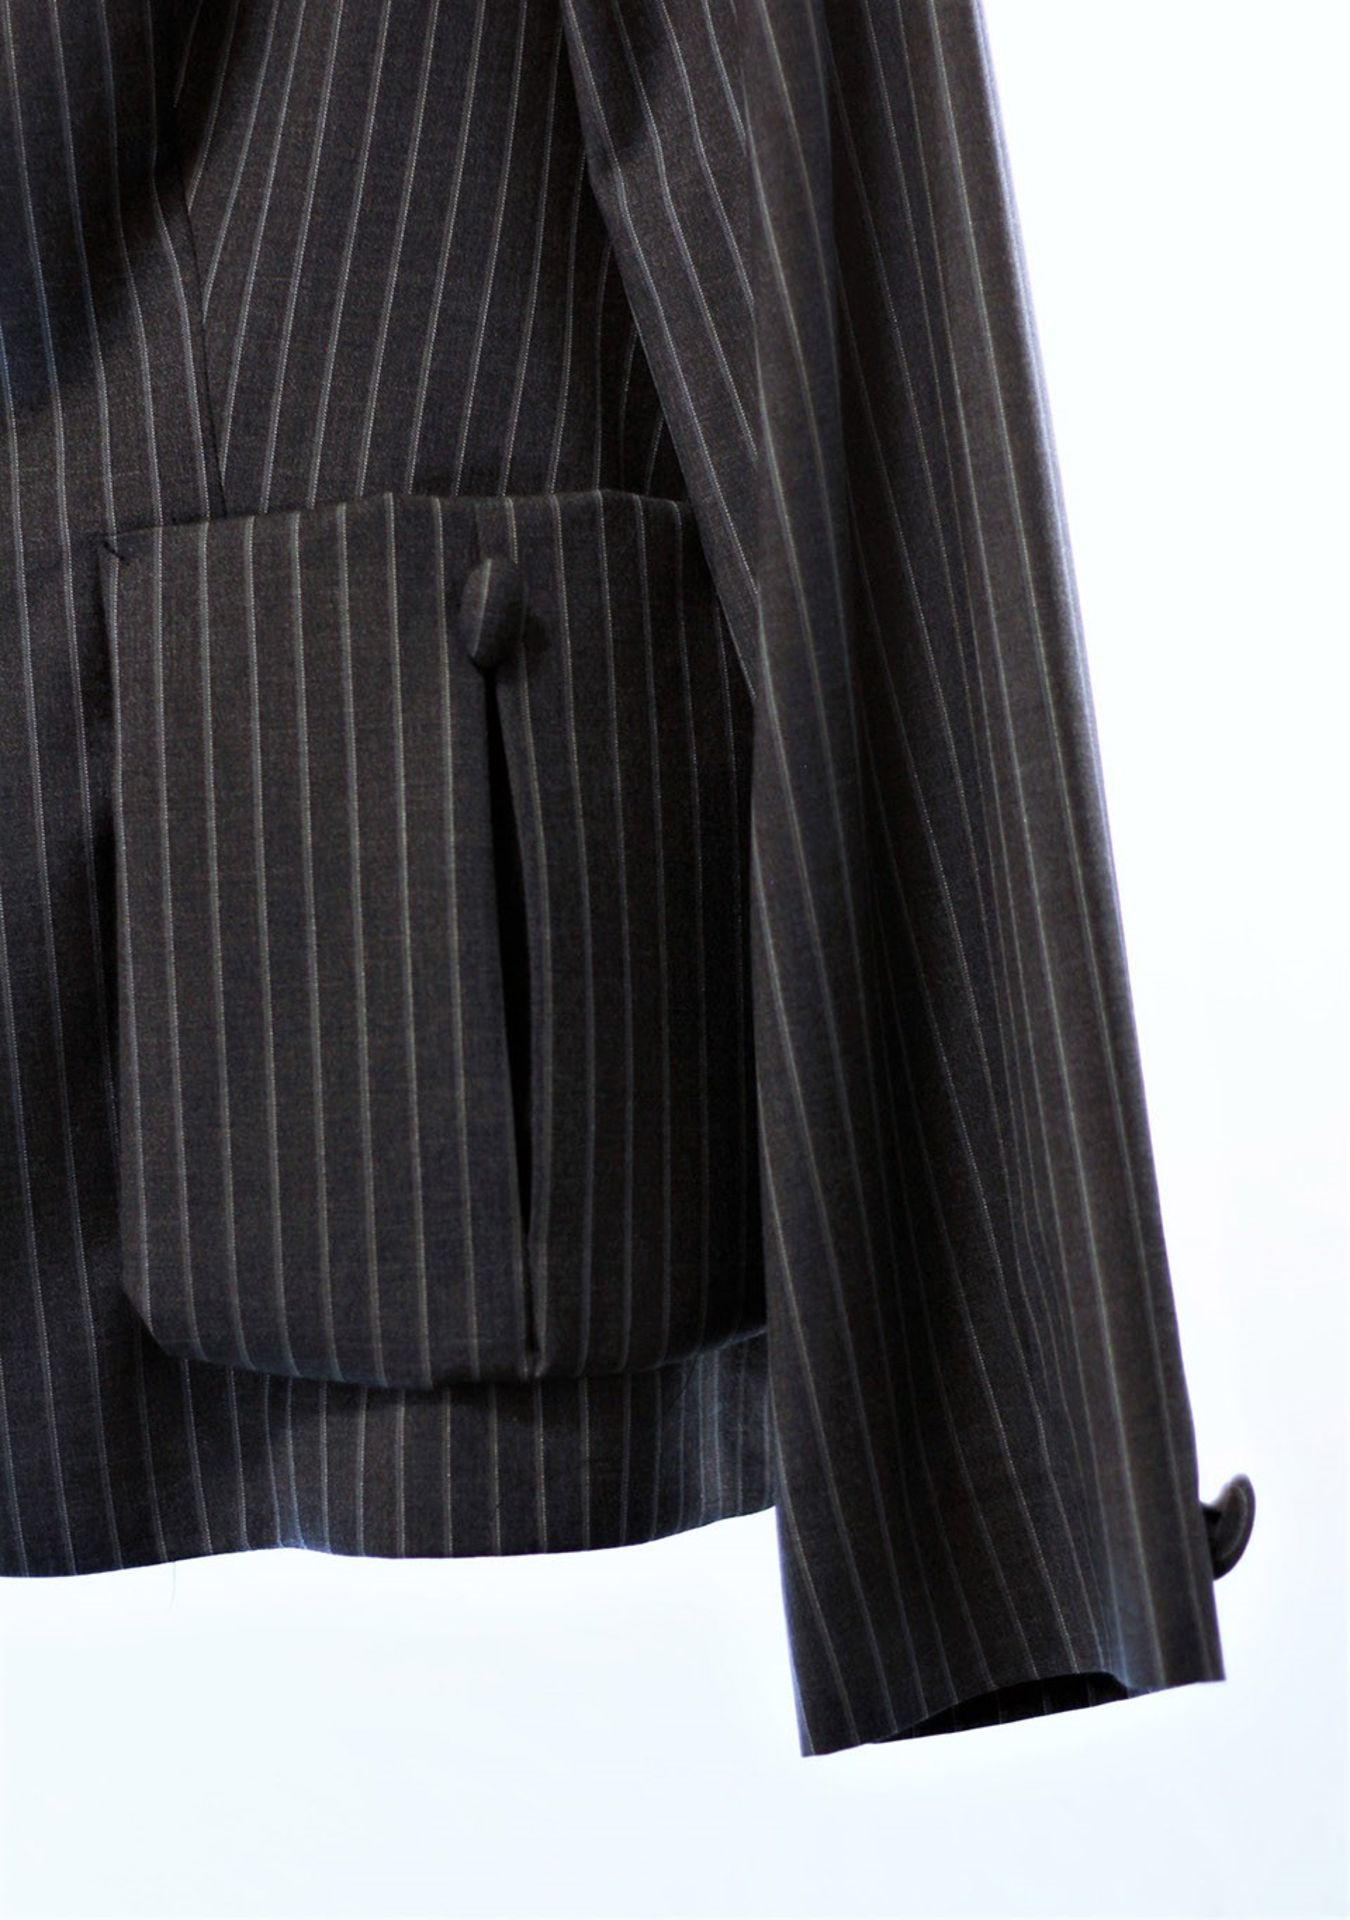 1 x Valentino Roma Grey Stripped Blazer - Size: 18 - Material: Lining 57% Acetate, 43% Cotton. - Image 4 of 7